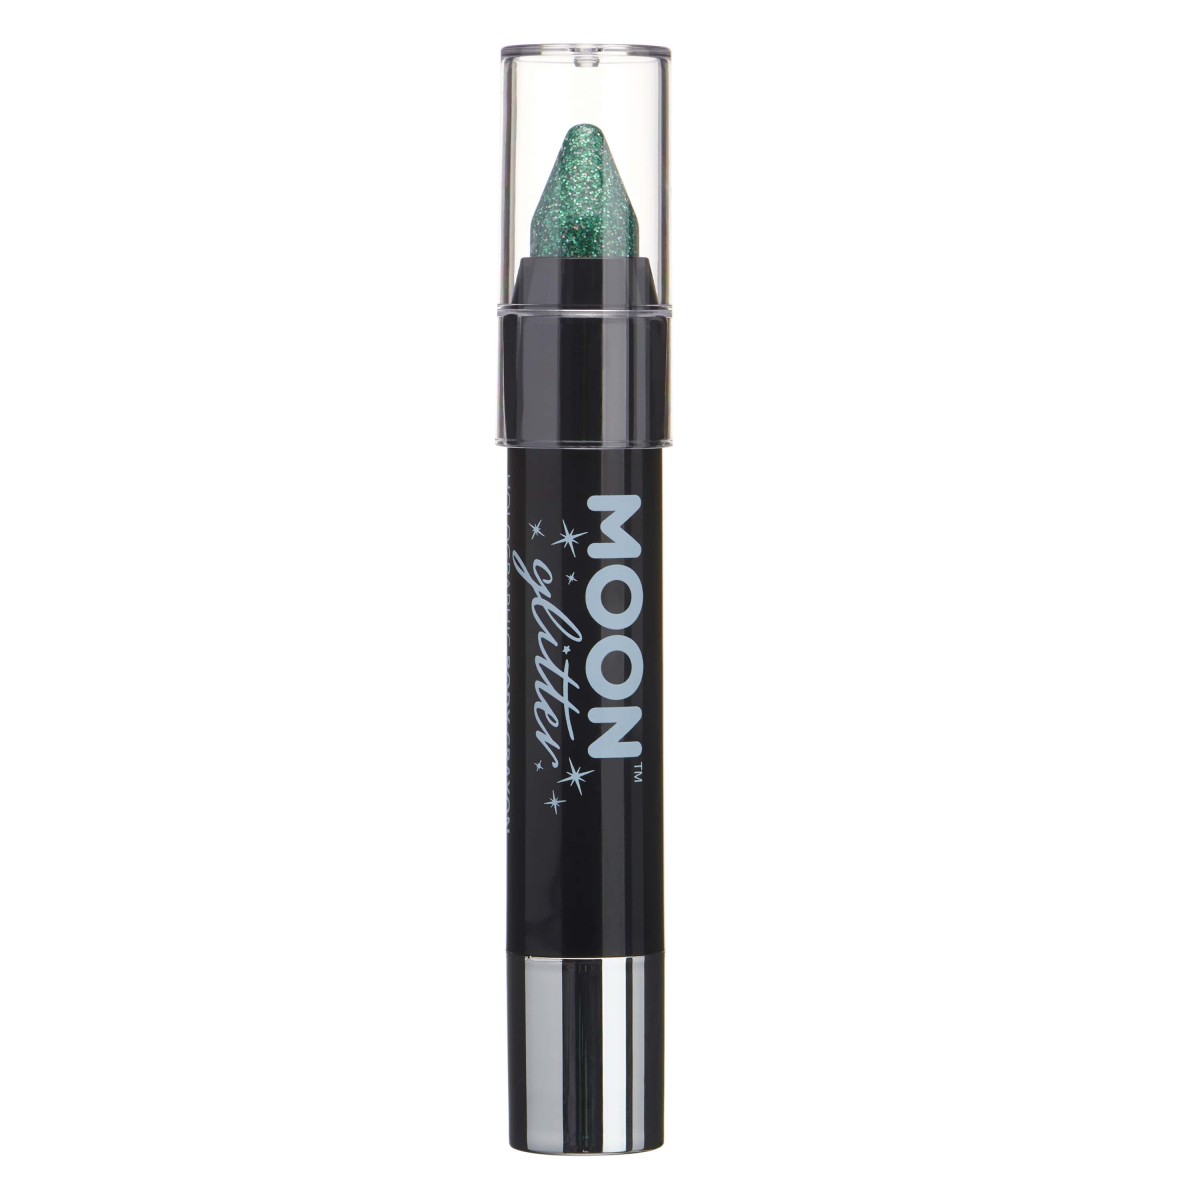 MOON CREATIONS G2 HOLOGRAPHIC GLITTER FACE & BODY CRAYON GREEN 3.2g